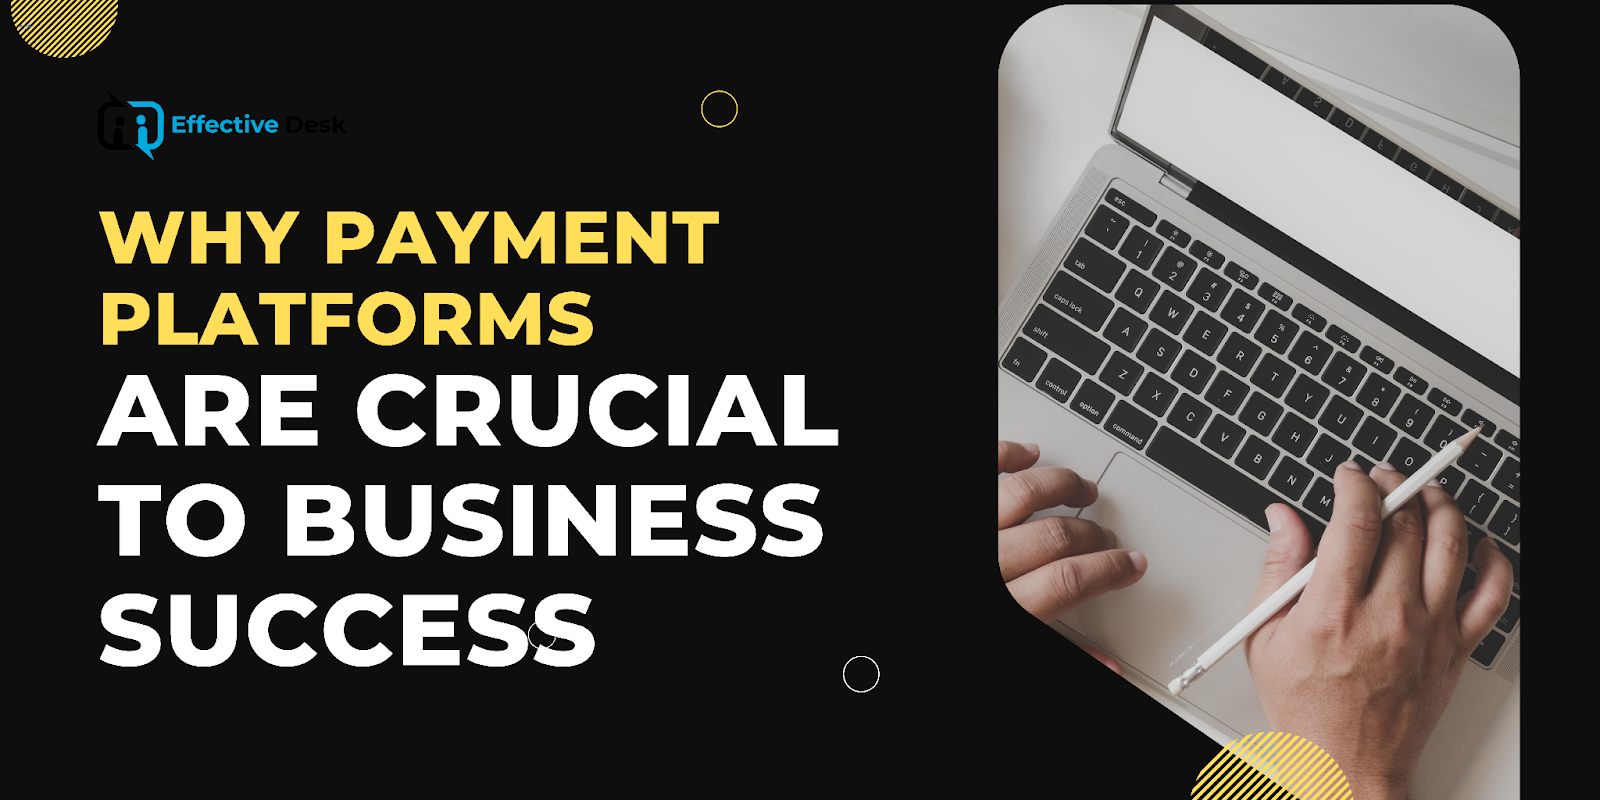 Why Payment Platforms Are Crucial To Business Success